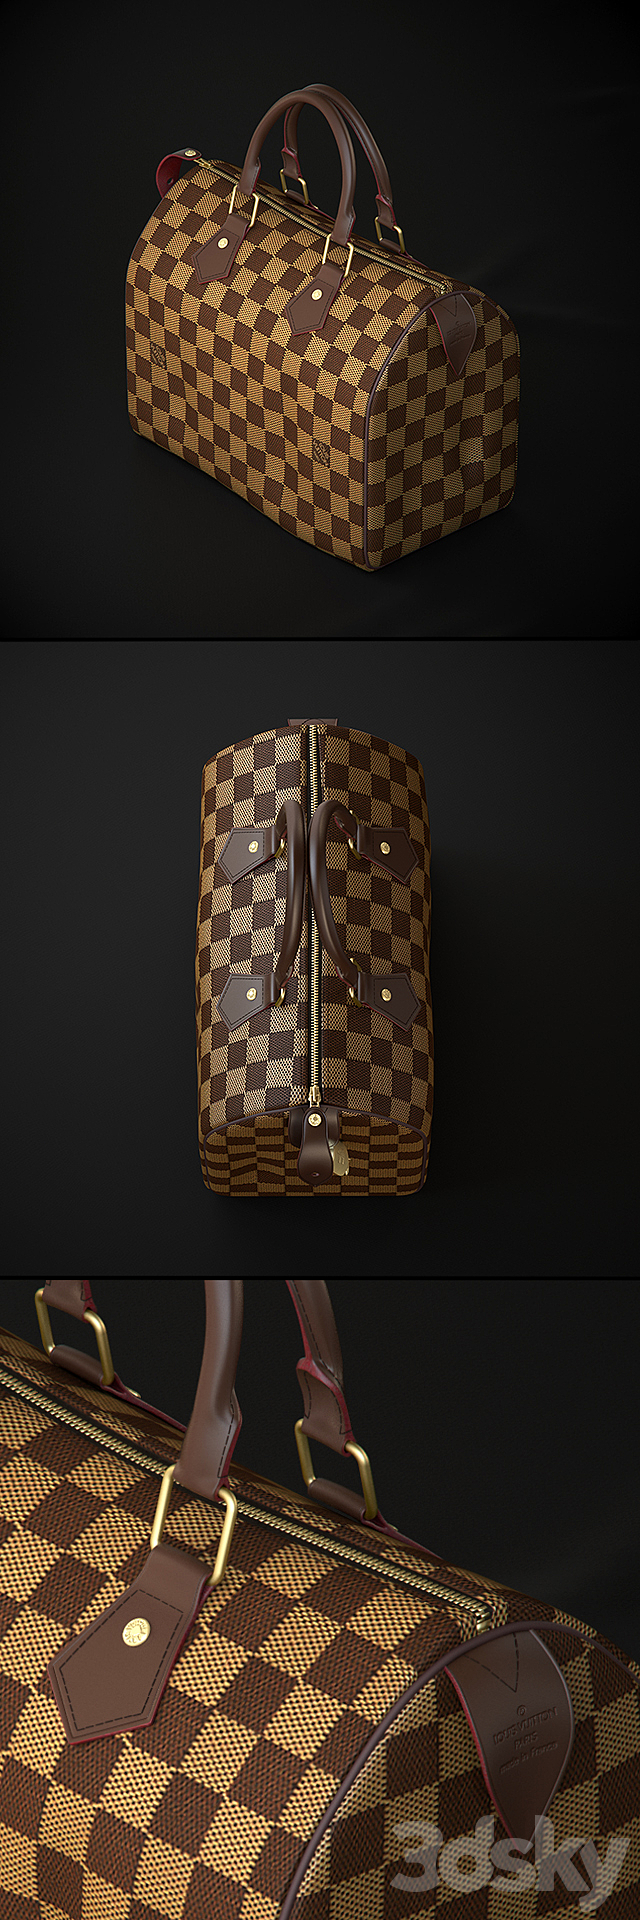 3d models: Other decorative objects - Louis Vuitton Speedy 25